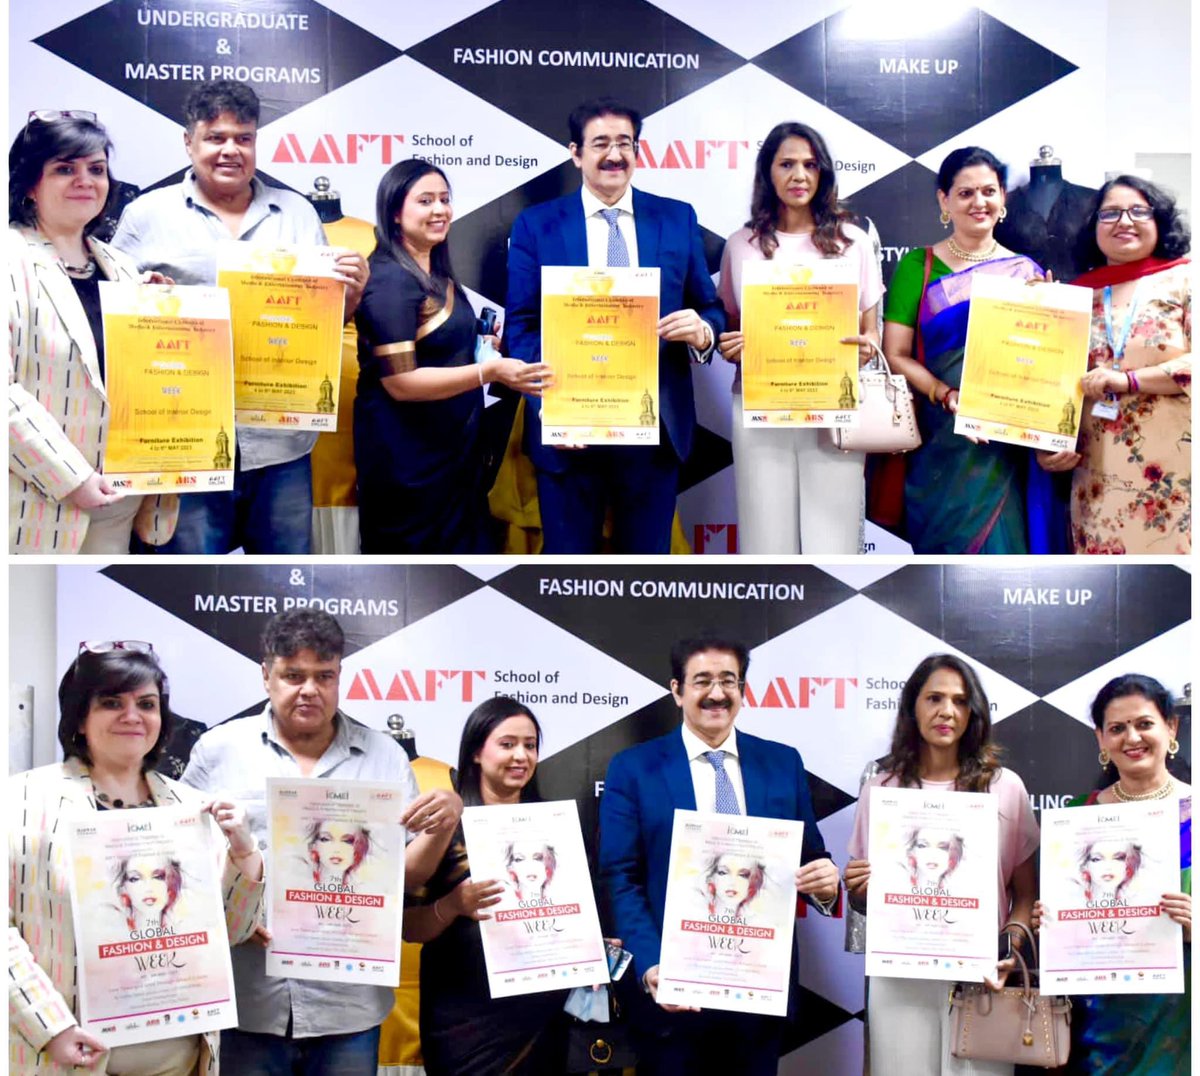 Global Fashion Week announced for 4/5/6th of May 2023. Poster Launched at AAFT  School of Fashion and Design #7thedition #global #fashionweek #design #posterlaunch #poster #launch #aaft #schooloffashionanddesign #fashion #design #icmei #sandeepmarwah